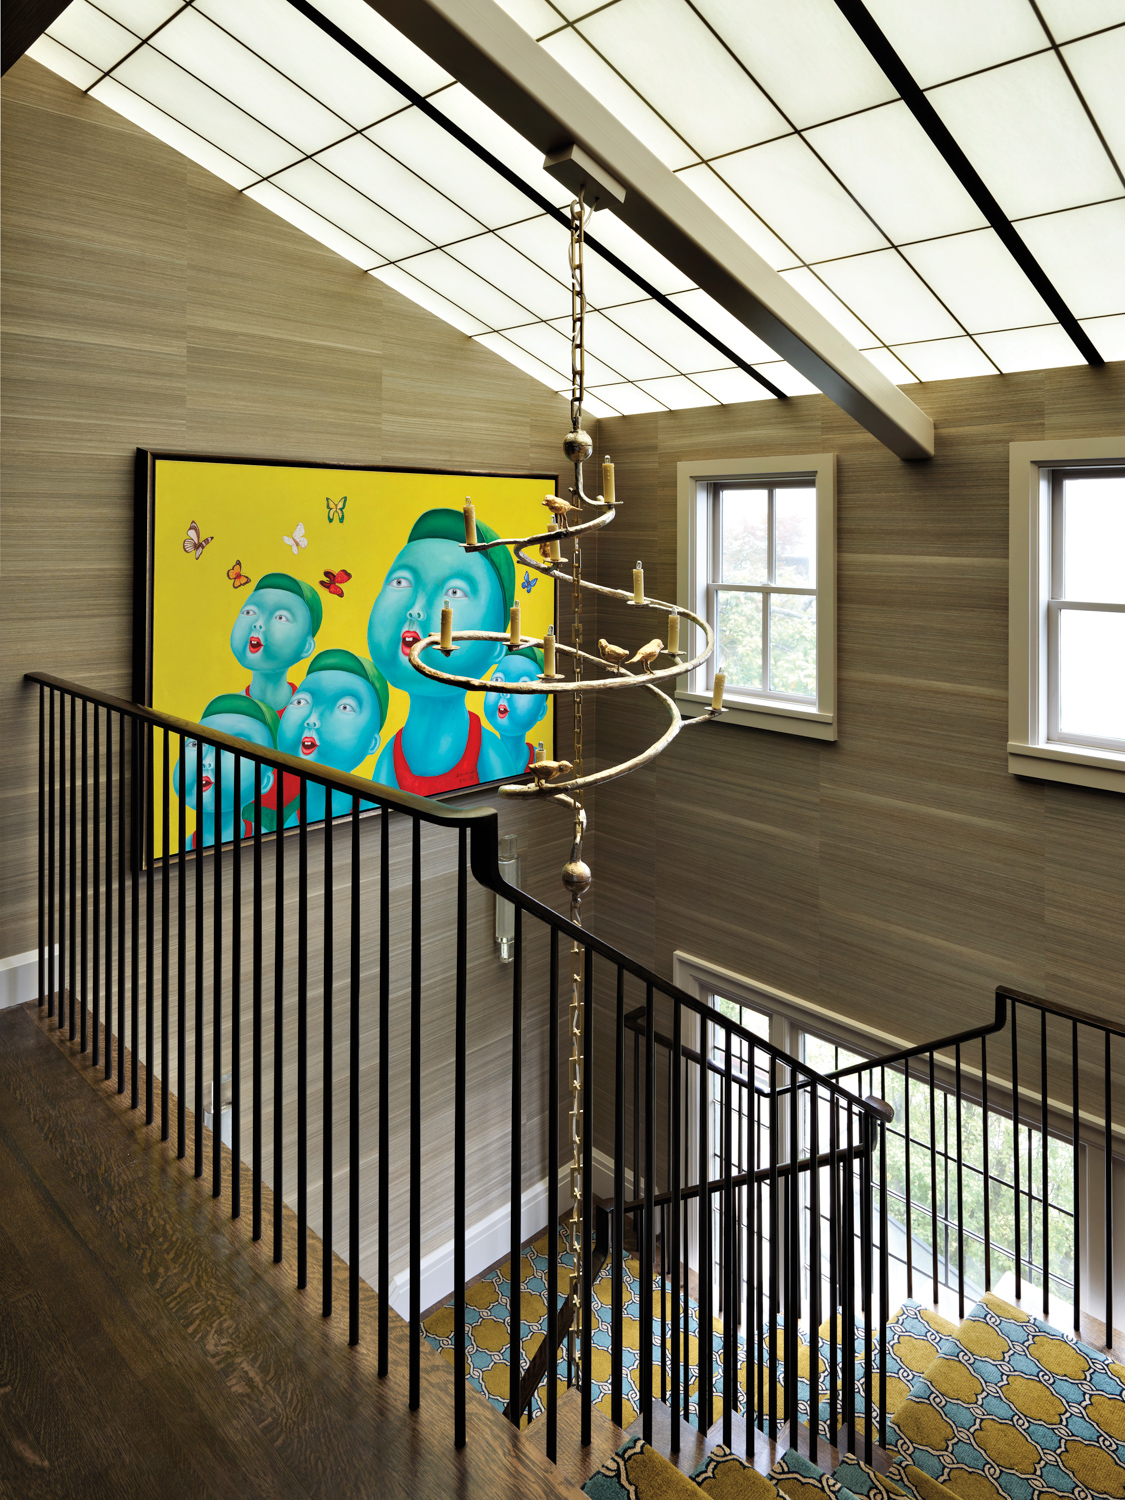 A vibrantly colored painting by Song Wei hangs in the main stairwell.